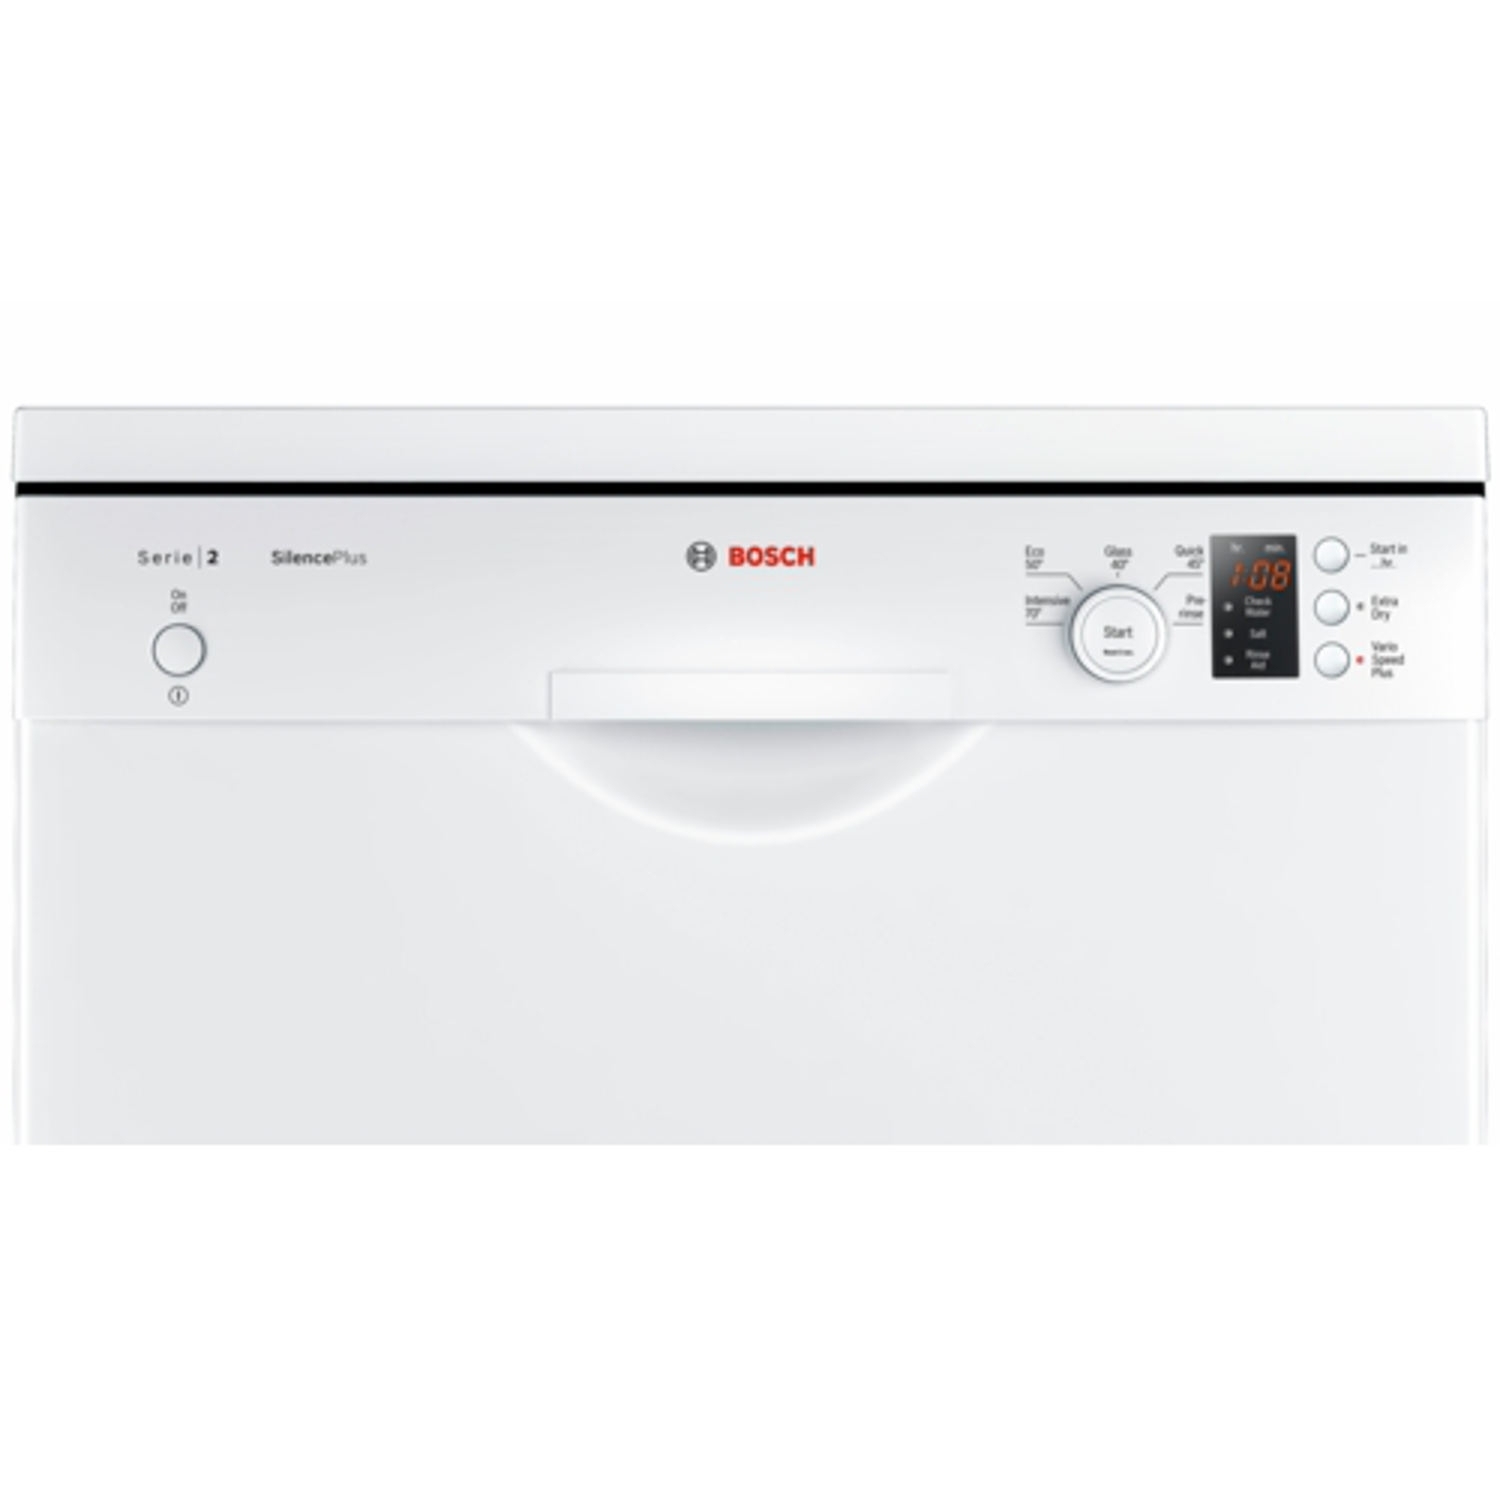 Bosch Full Size Dishwasher - White - A++ Rated - 5